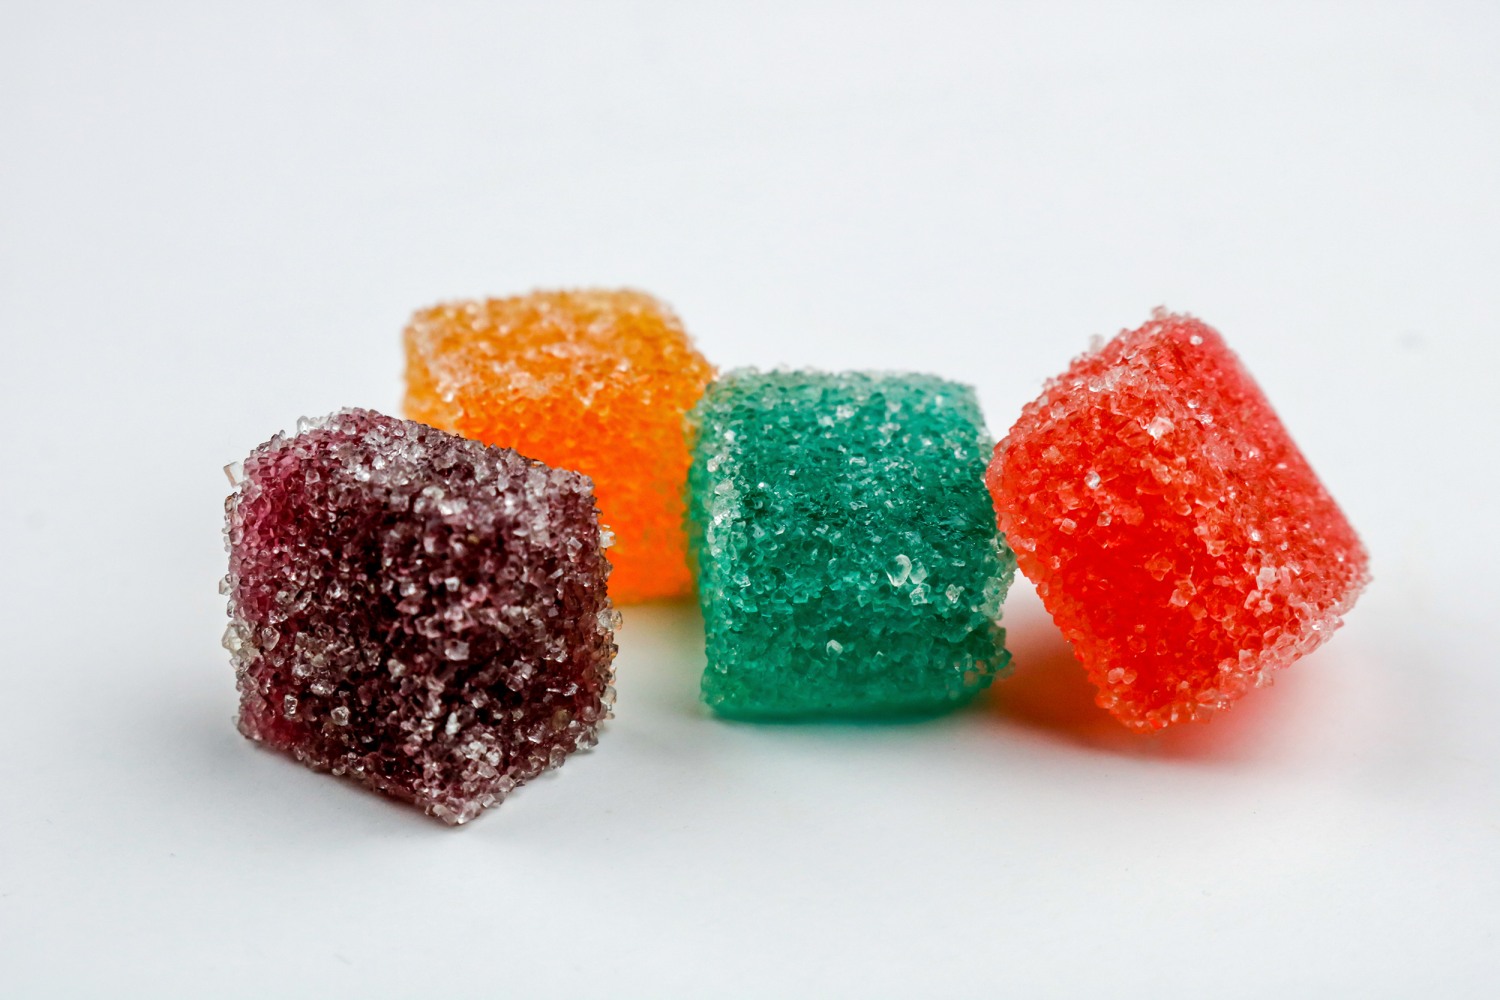 The Trouble with Treats: the Current Danger of Marijuana Edibles